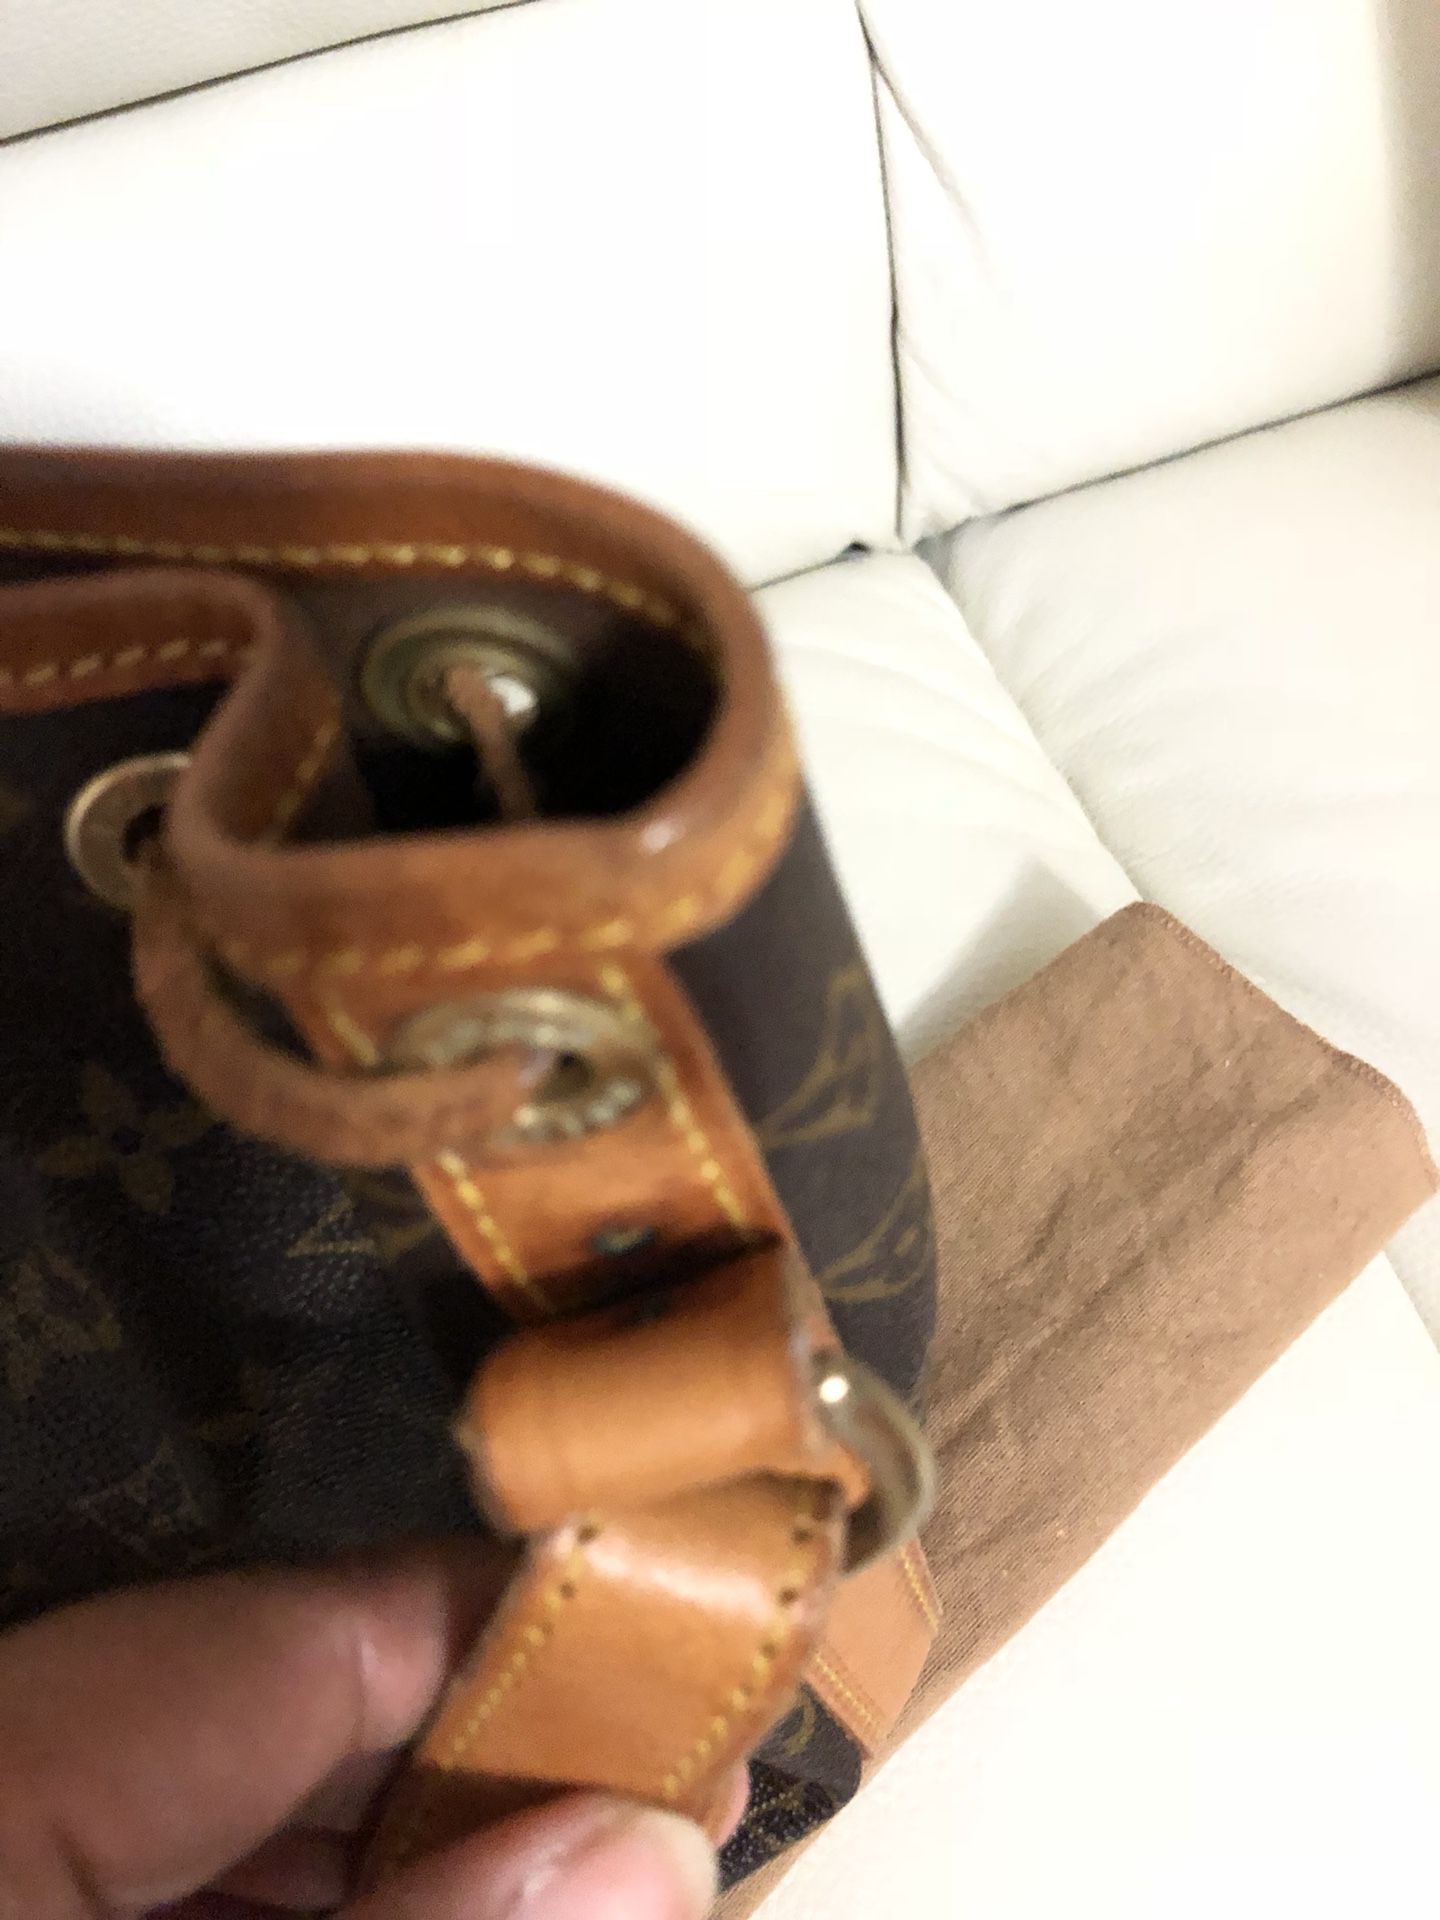 Louis Vuitton ca 36929 red plain rainbow jacket.. New without Tag and box.  100% Authentic for Sale in Chicago, IL - OfferUp